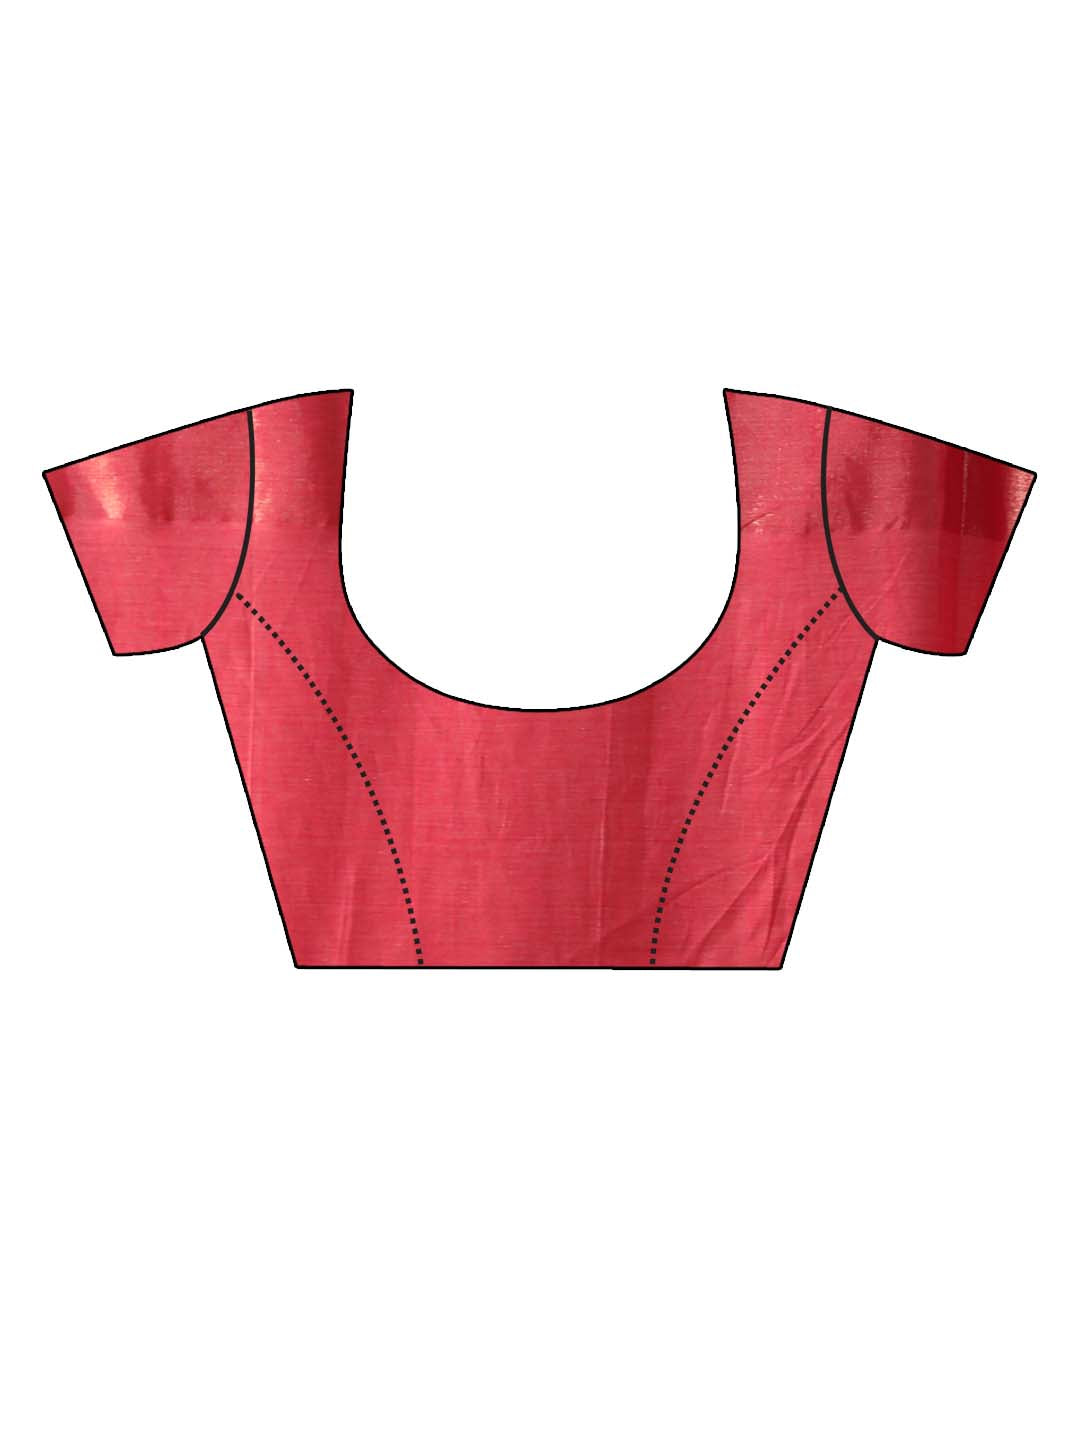 Indethnic Red Color Blocked Party Wear - Blouse Piece View